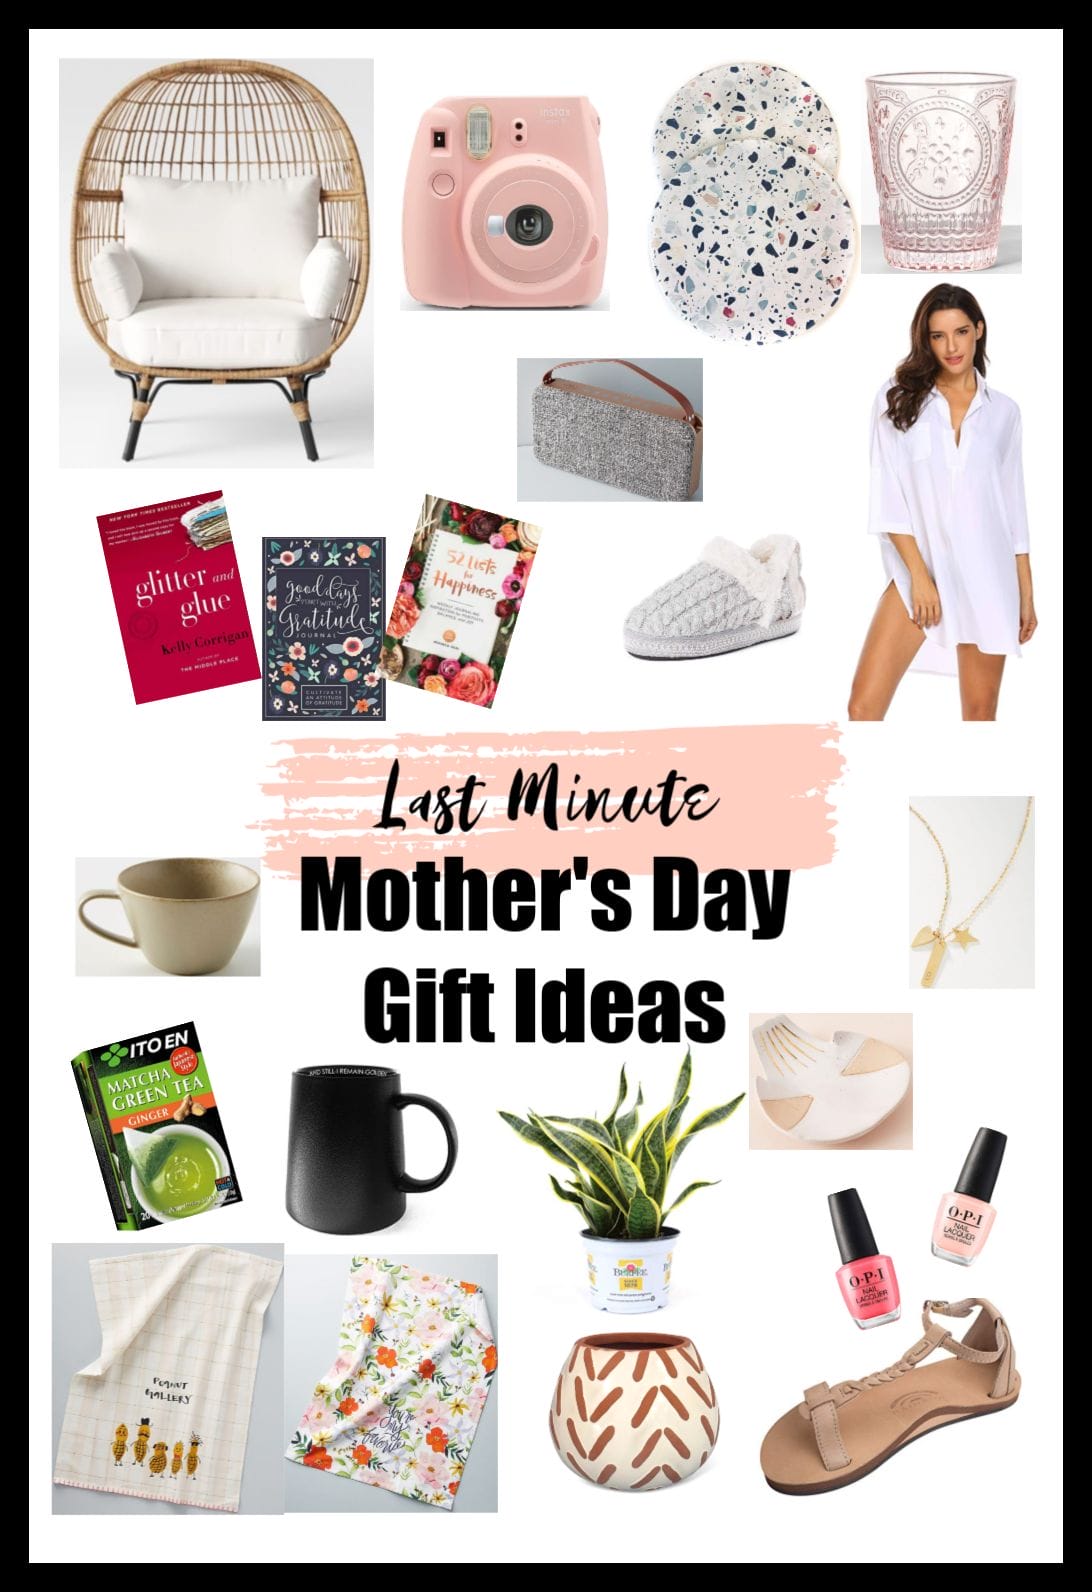 The 35 Best Last-Minute Mother's Day Gift Ideas